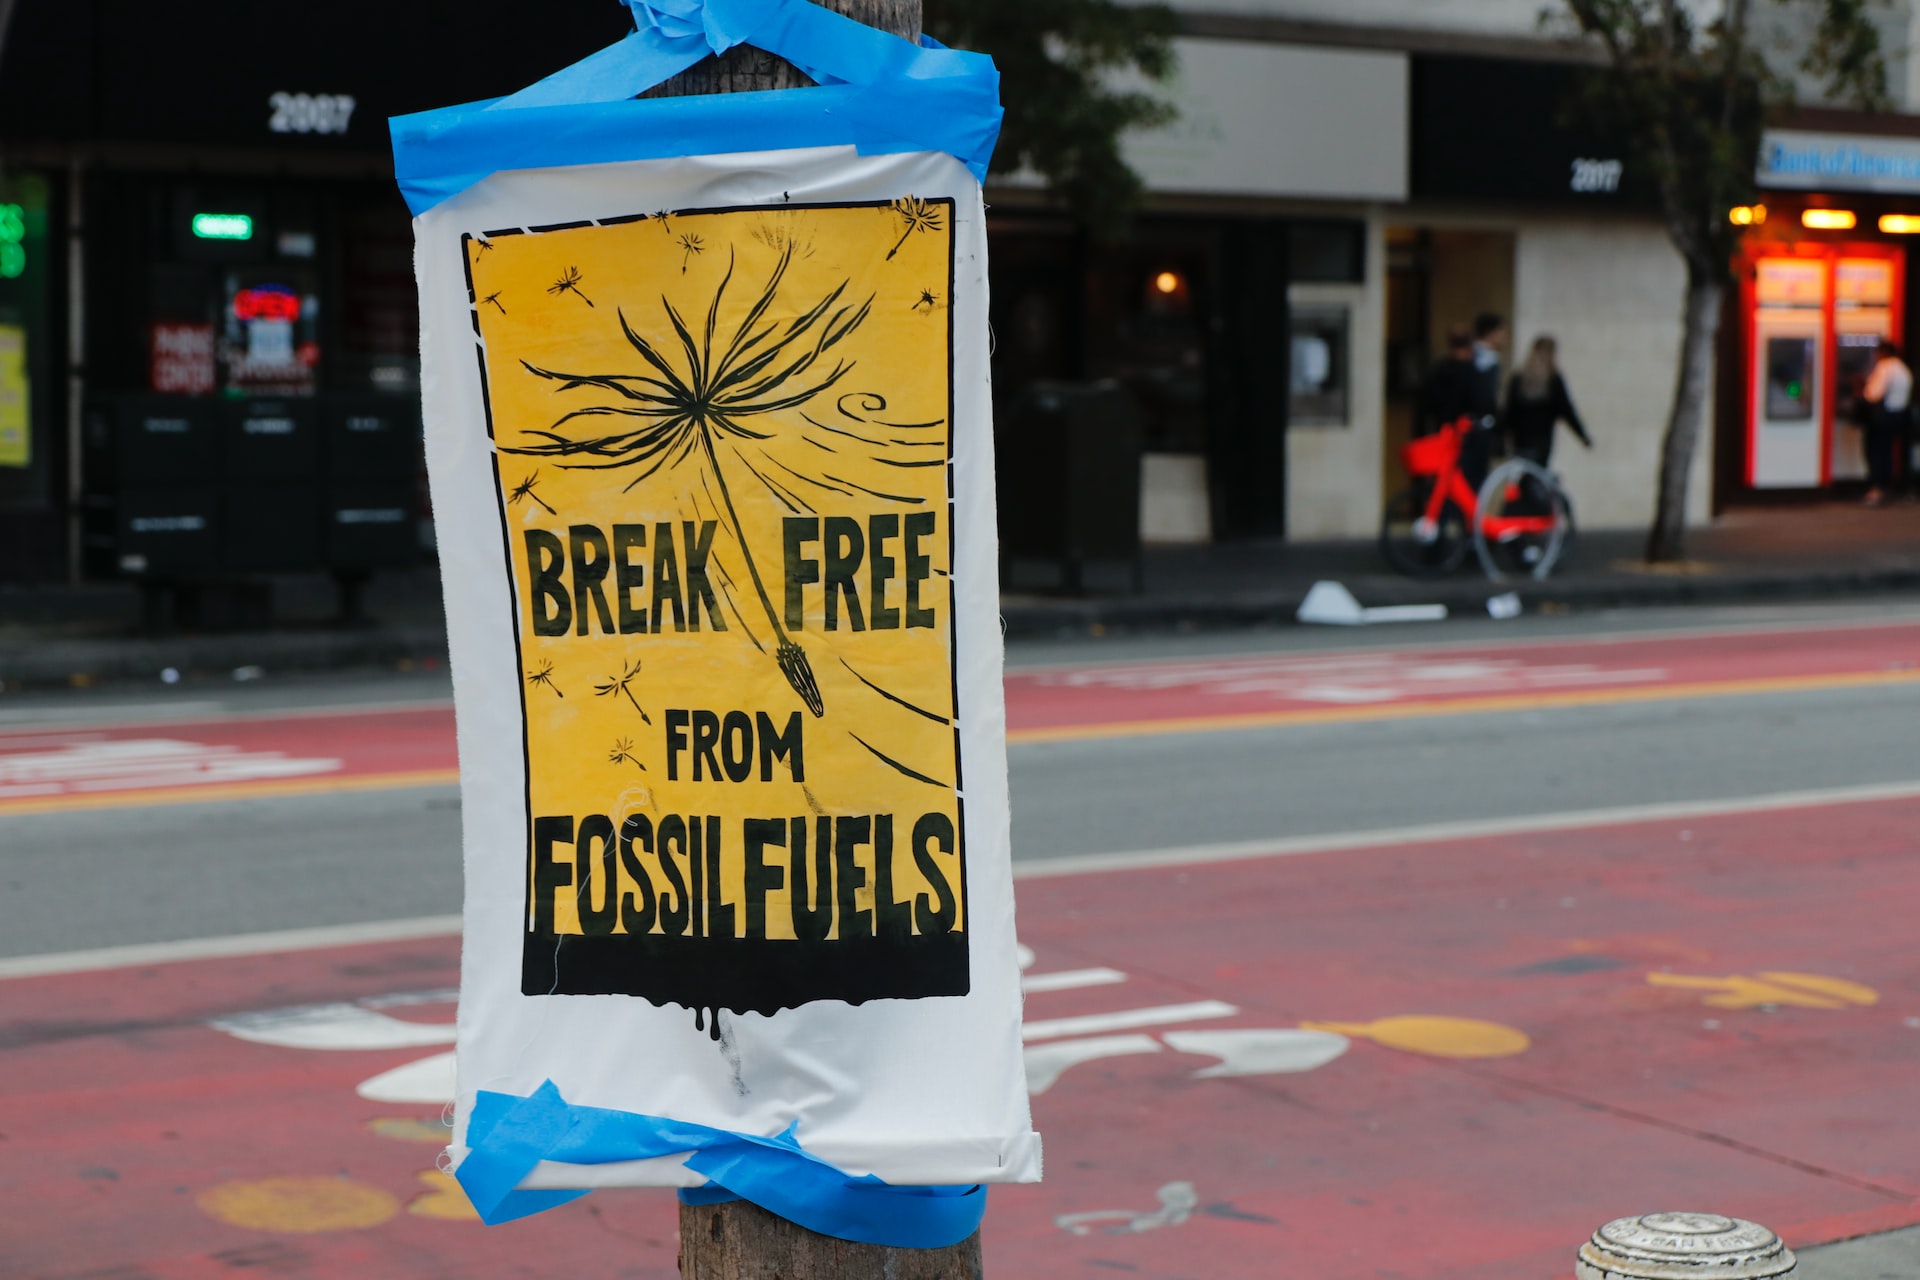 A protest signage against the use of fossil fuels, a non-renewable energy source.